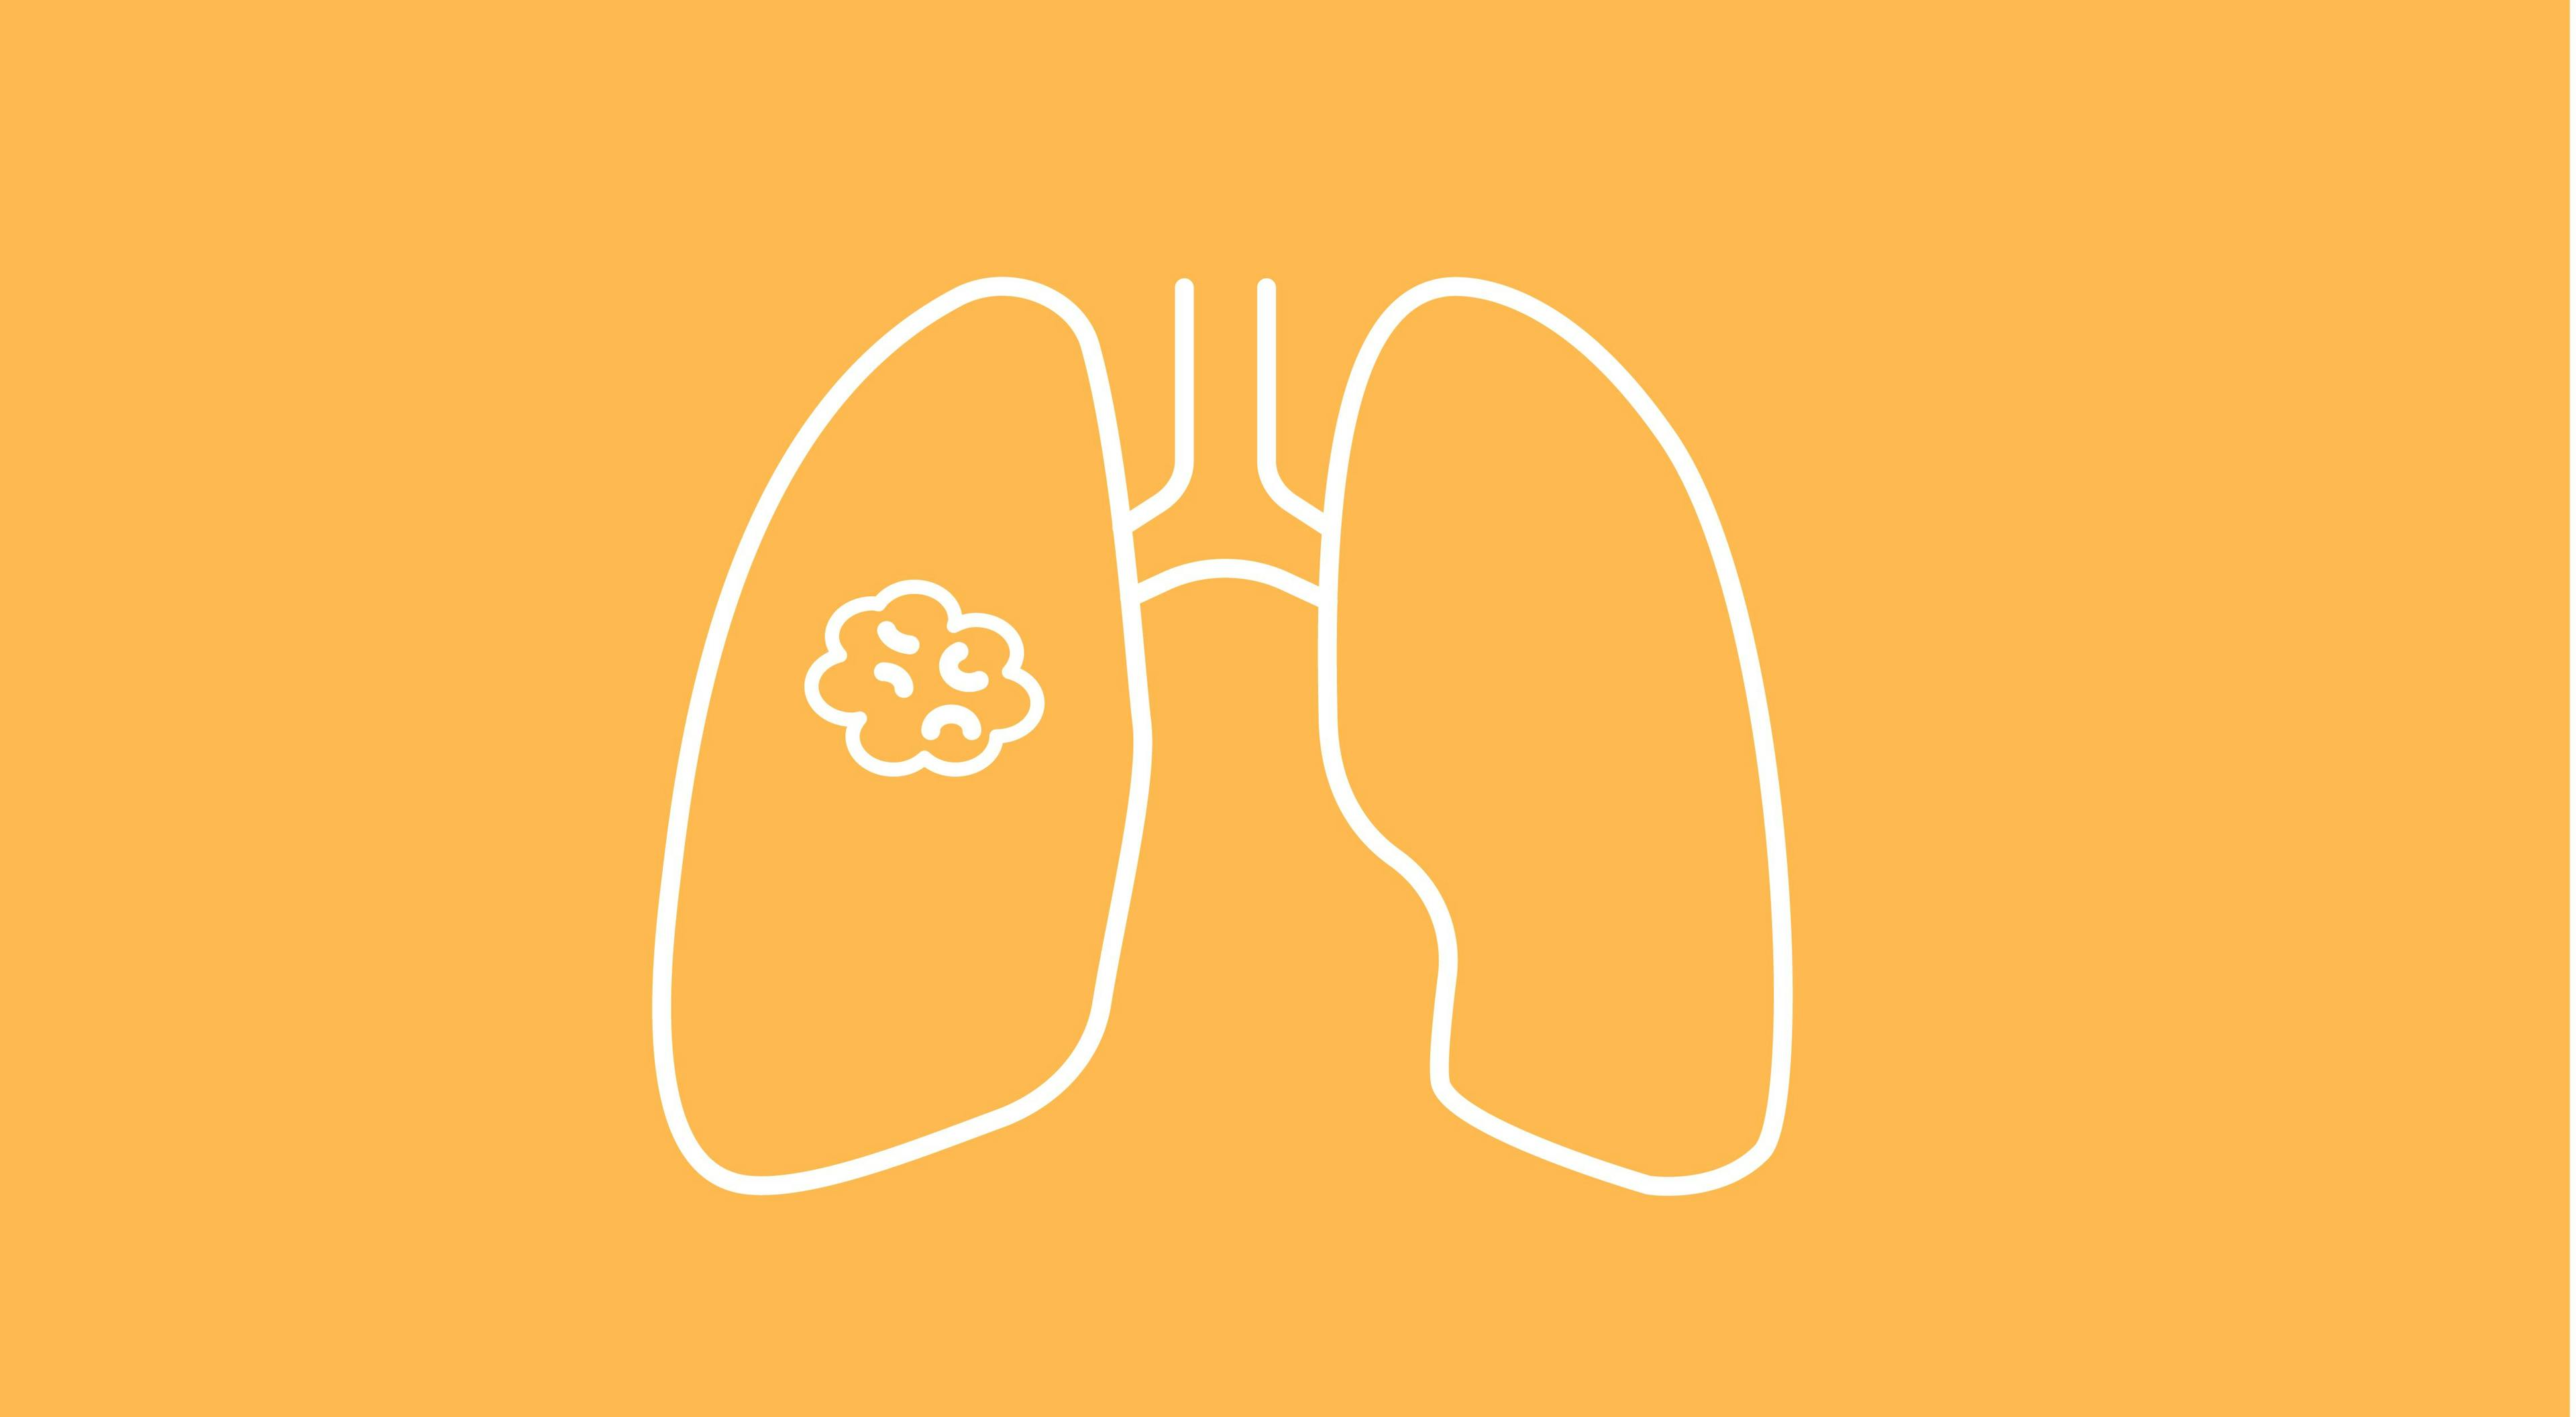 Trilaciclib Snags ASCO Recommendation in Extensive-Stage Small Cell Lung Cancer